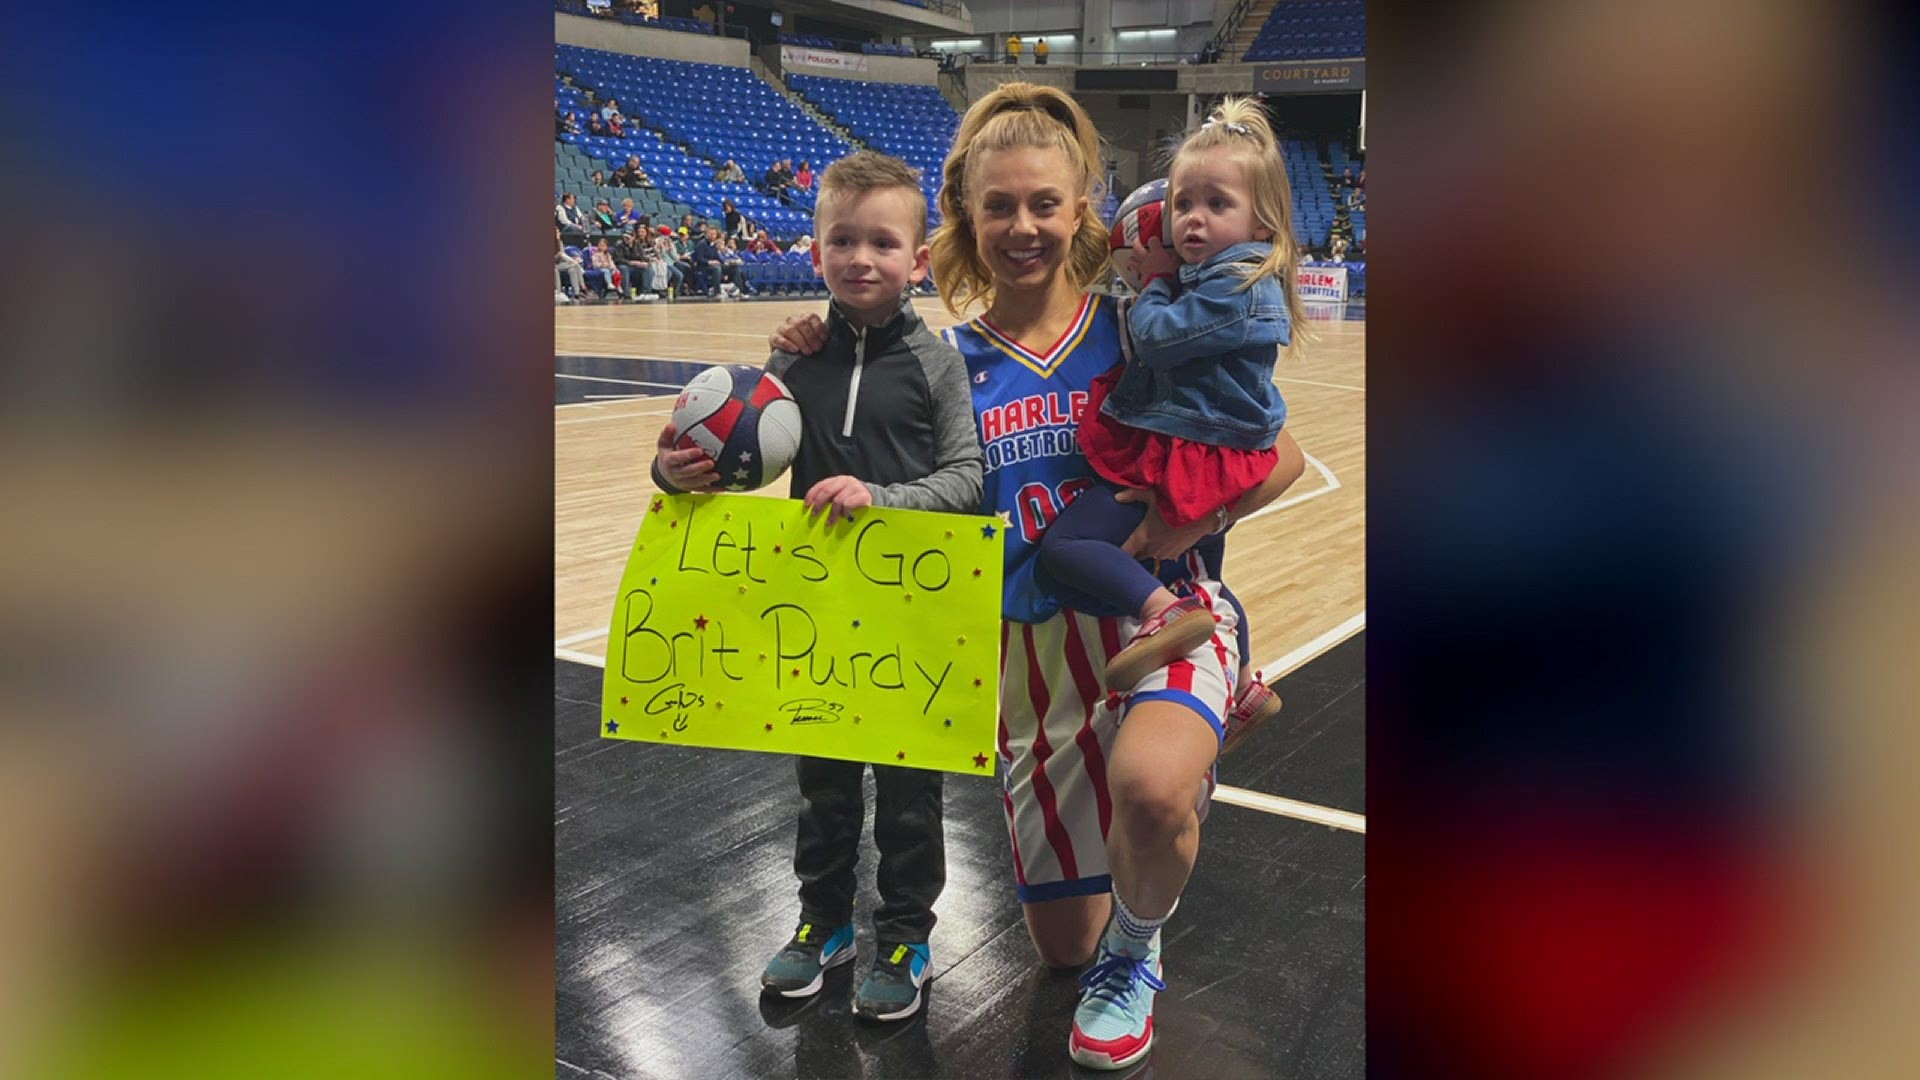 Newswatch 16 reporter Brit Purdy joined the Harlem Globetrotters on the basketball court.